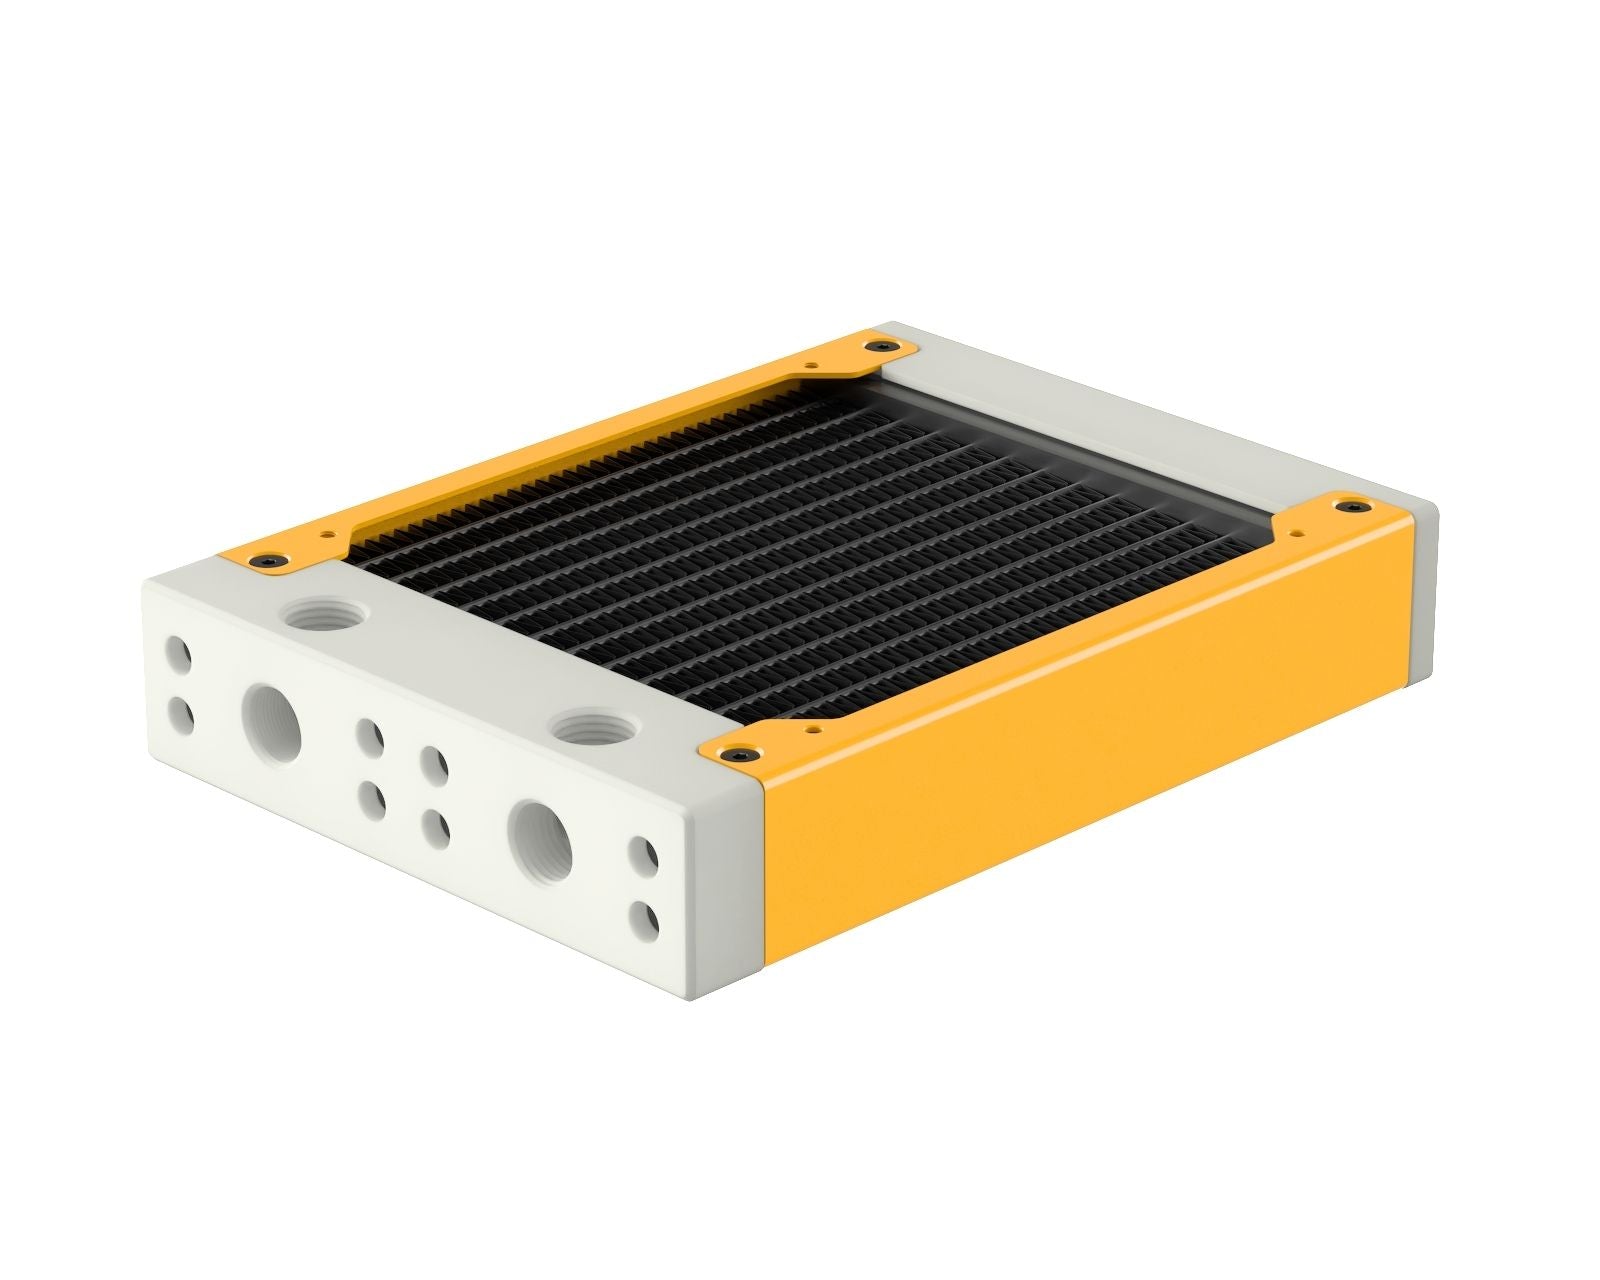 PrimoChill 120SL (30mm) EXIMO Modular Radiator, White POM, 1x120mm, Single Fan (R-SL-W12) Available in 20+ Colors, Assembled in USA and Custom Watercooling Loop Ready - Yellow